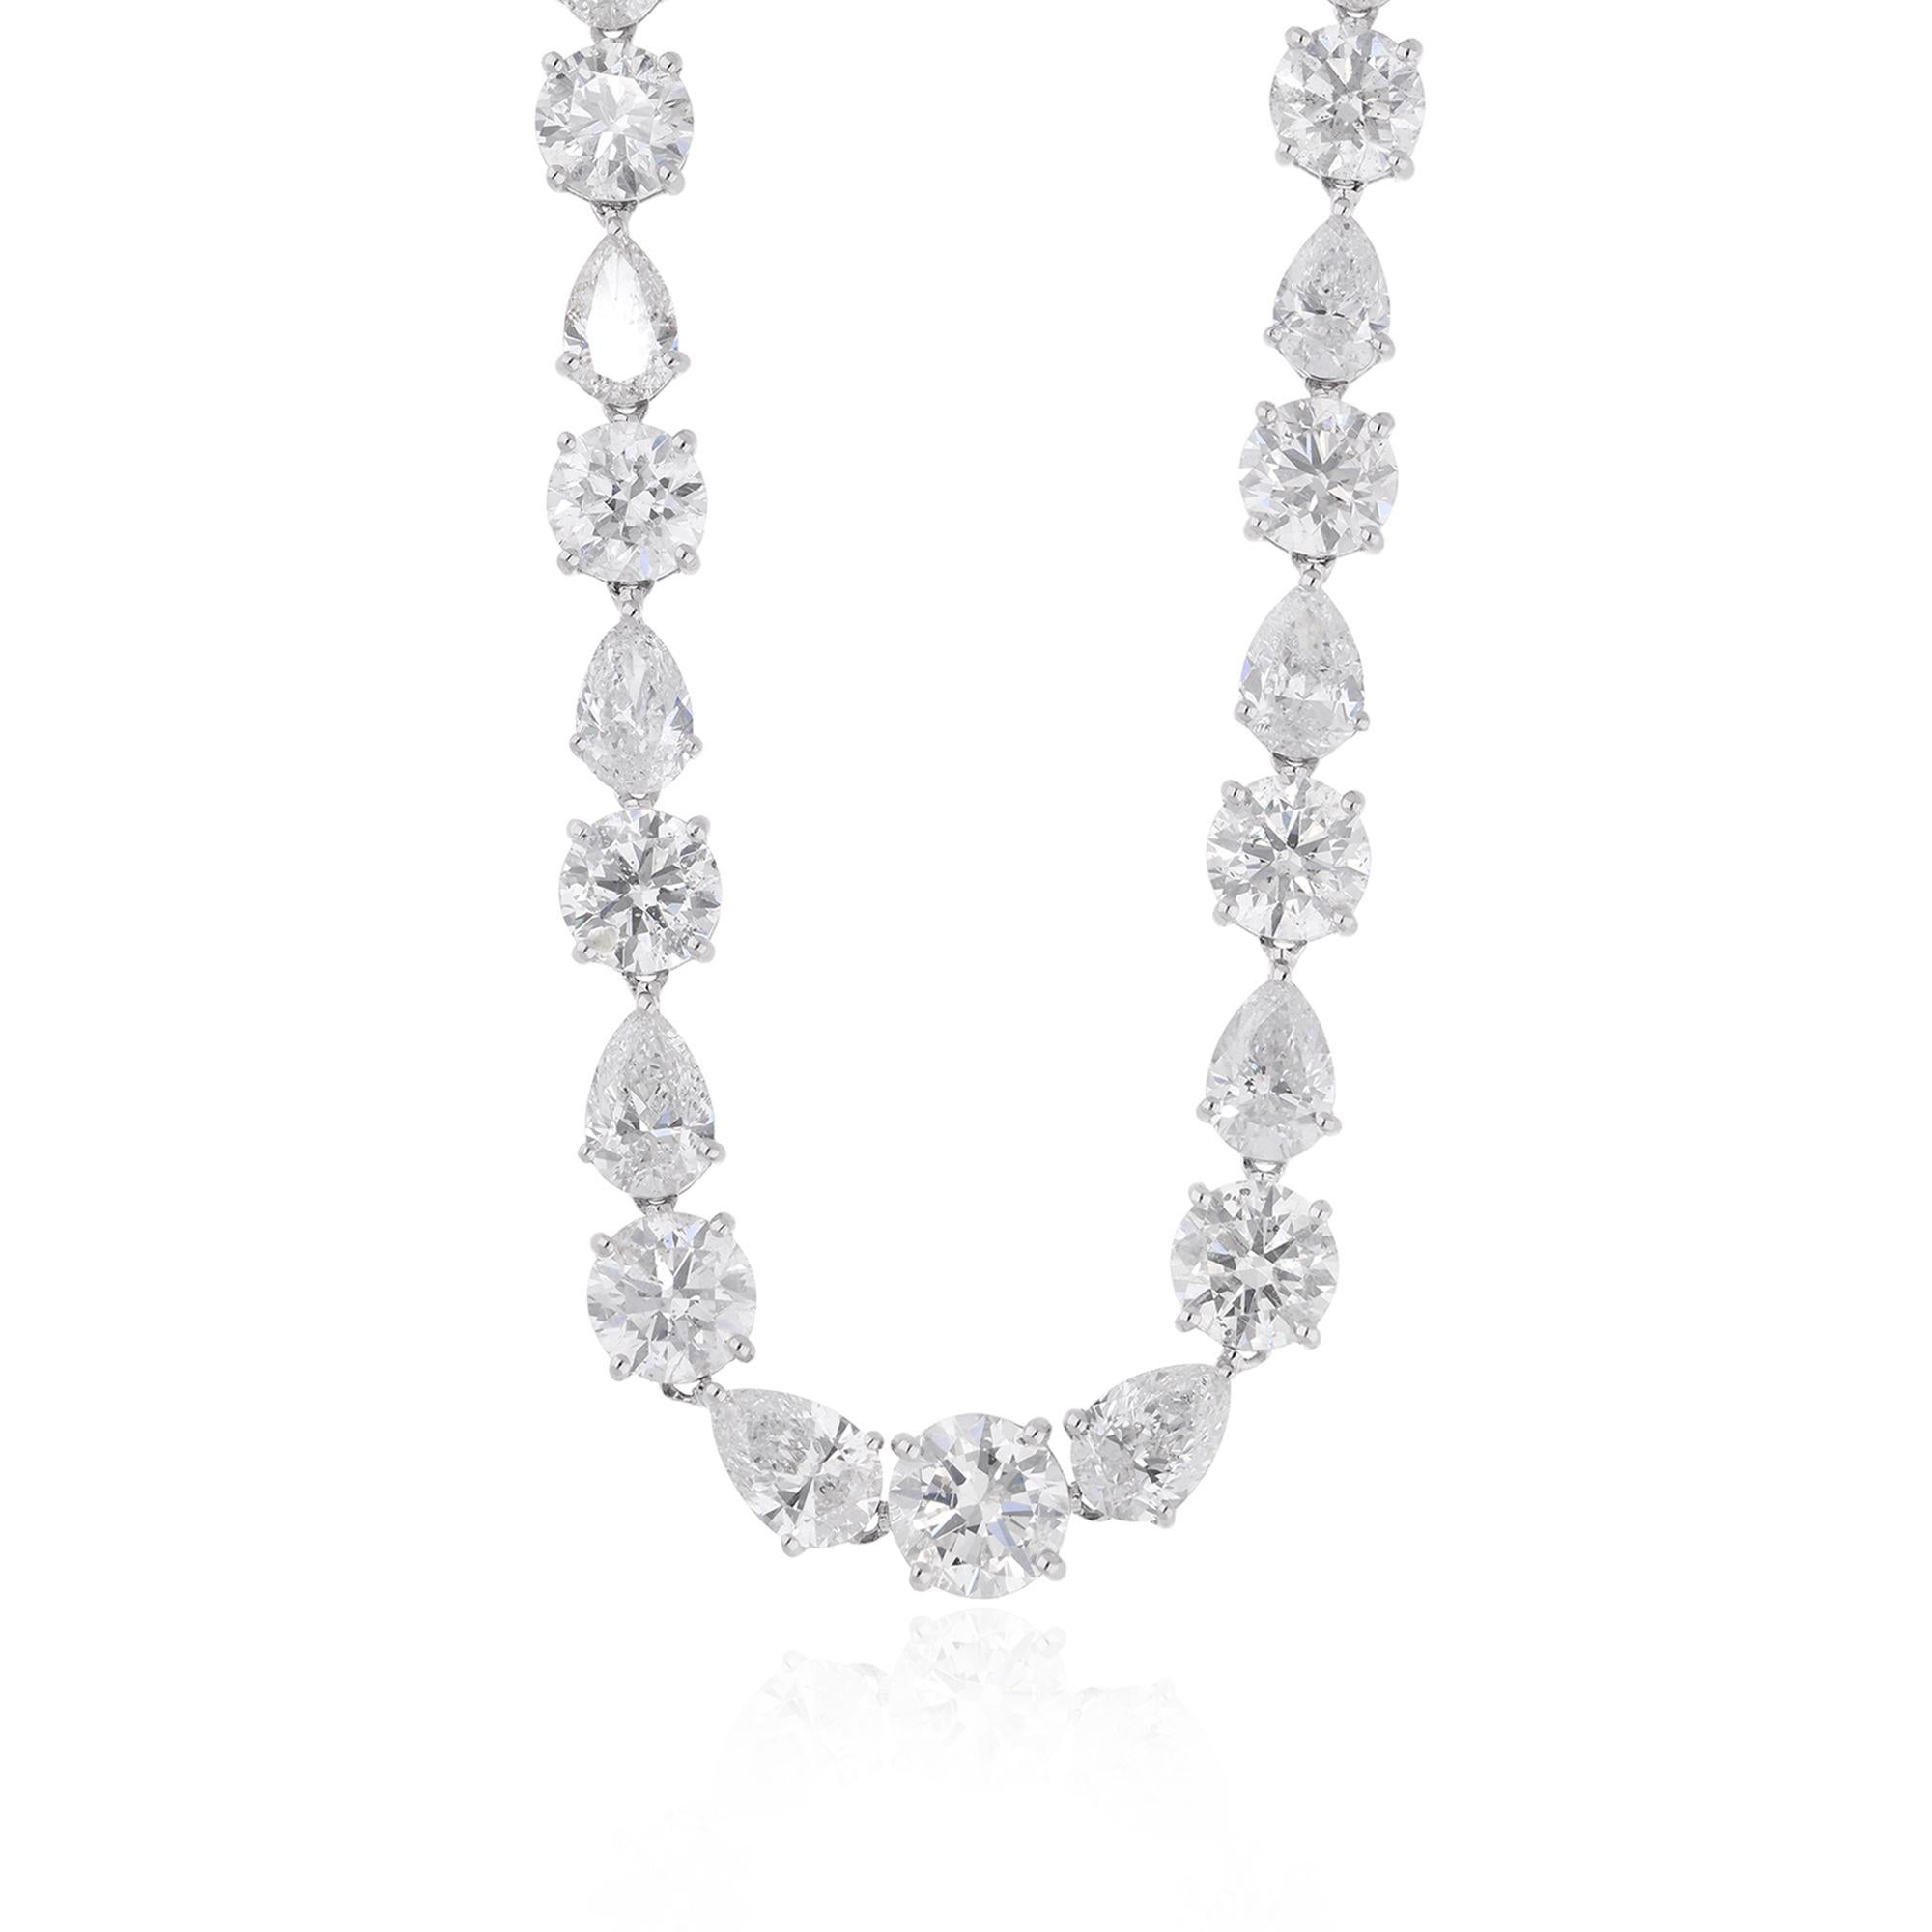 At the heart of this stunning necklace lies a magnificent arrangement of round and pear-shaped diamonds, meticulously selected for their exceptional brilliance, clarity, and fire. With a total carat weight of 29.08, these diamonds exude opulence and